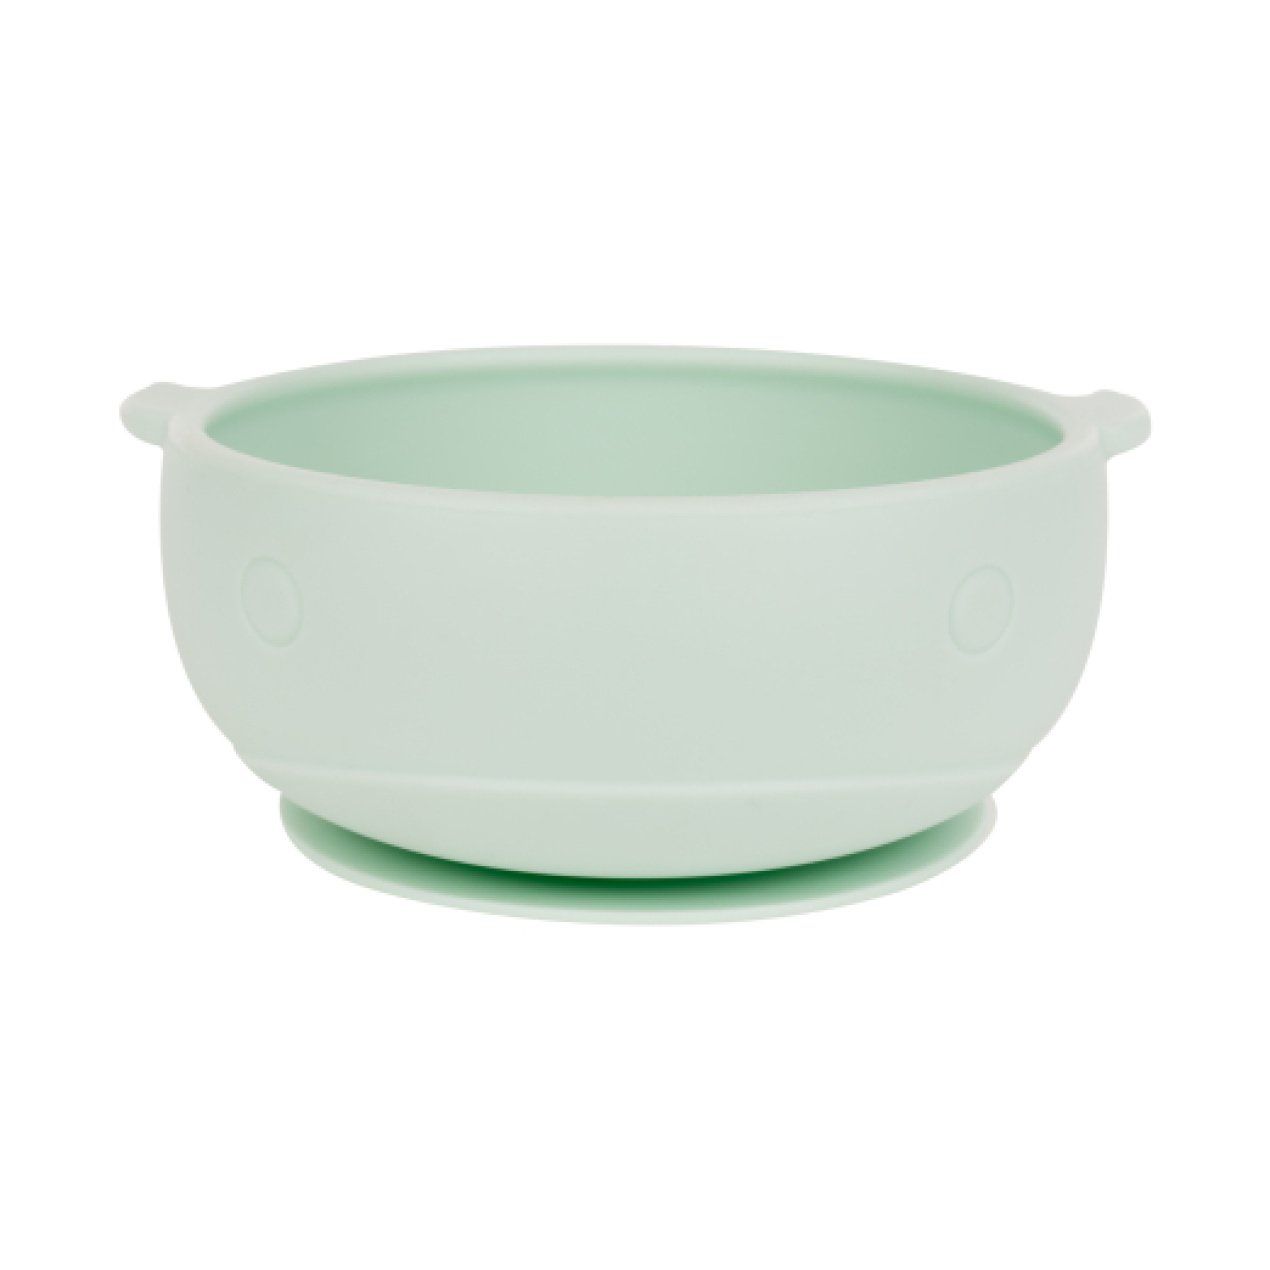 siliconebowl_whale_mint_1_31302040119_web